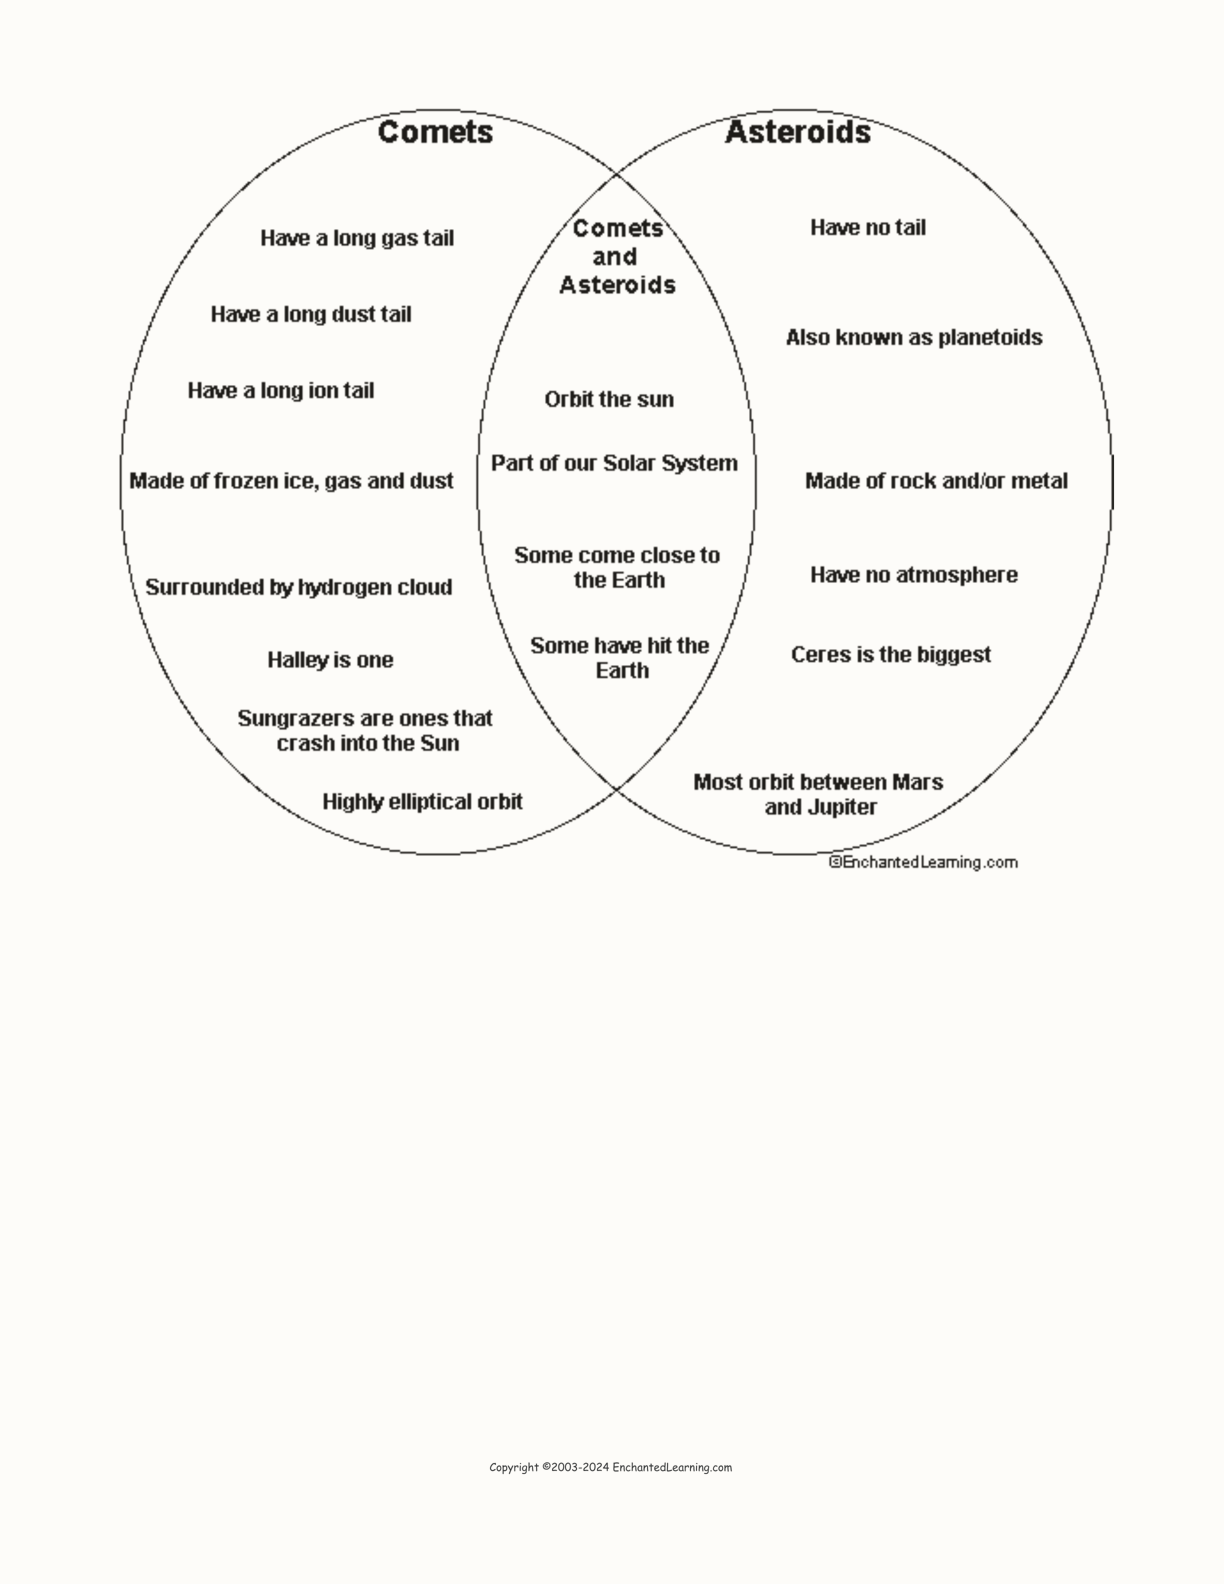 Comets and Asteroids Venn Diagram interactive worksheet page 2